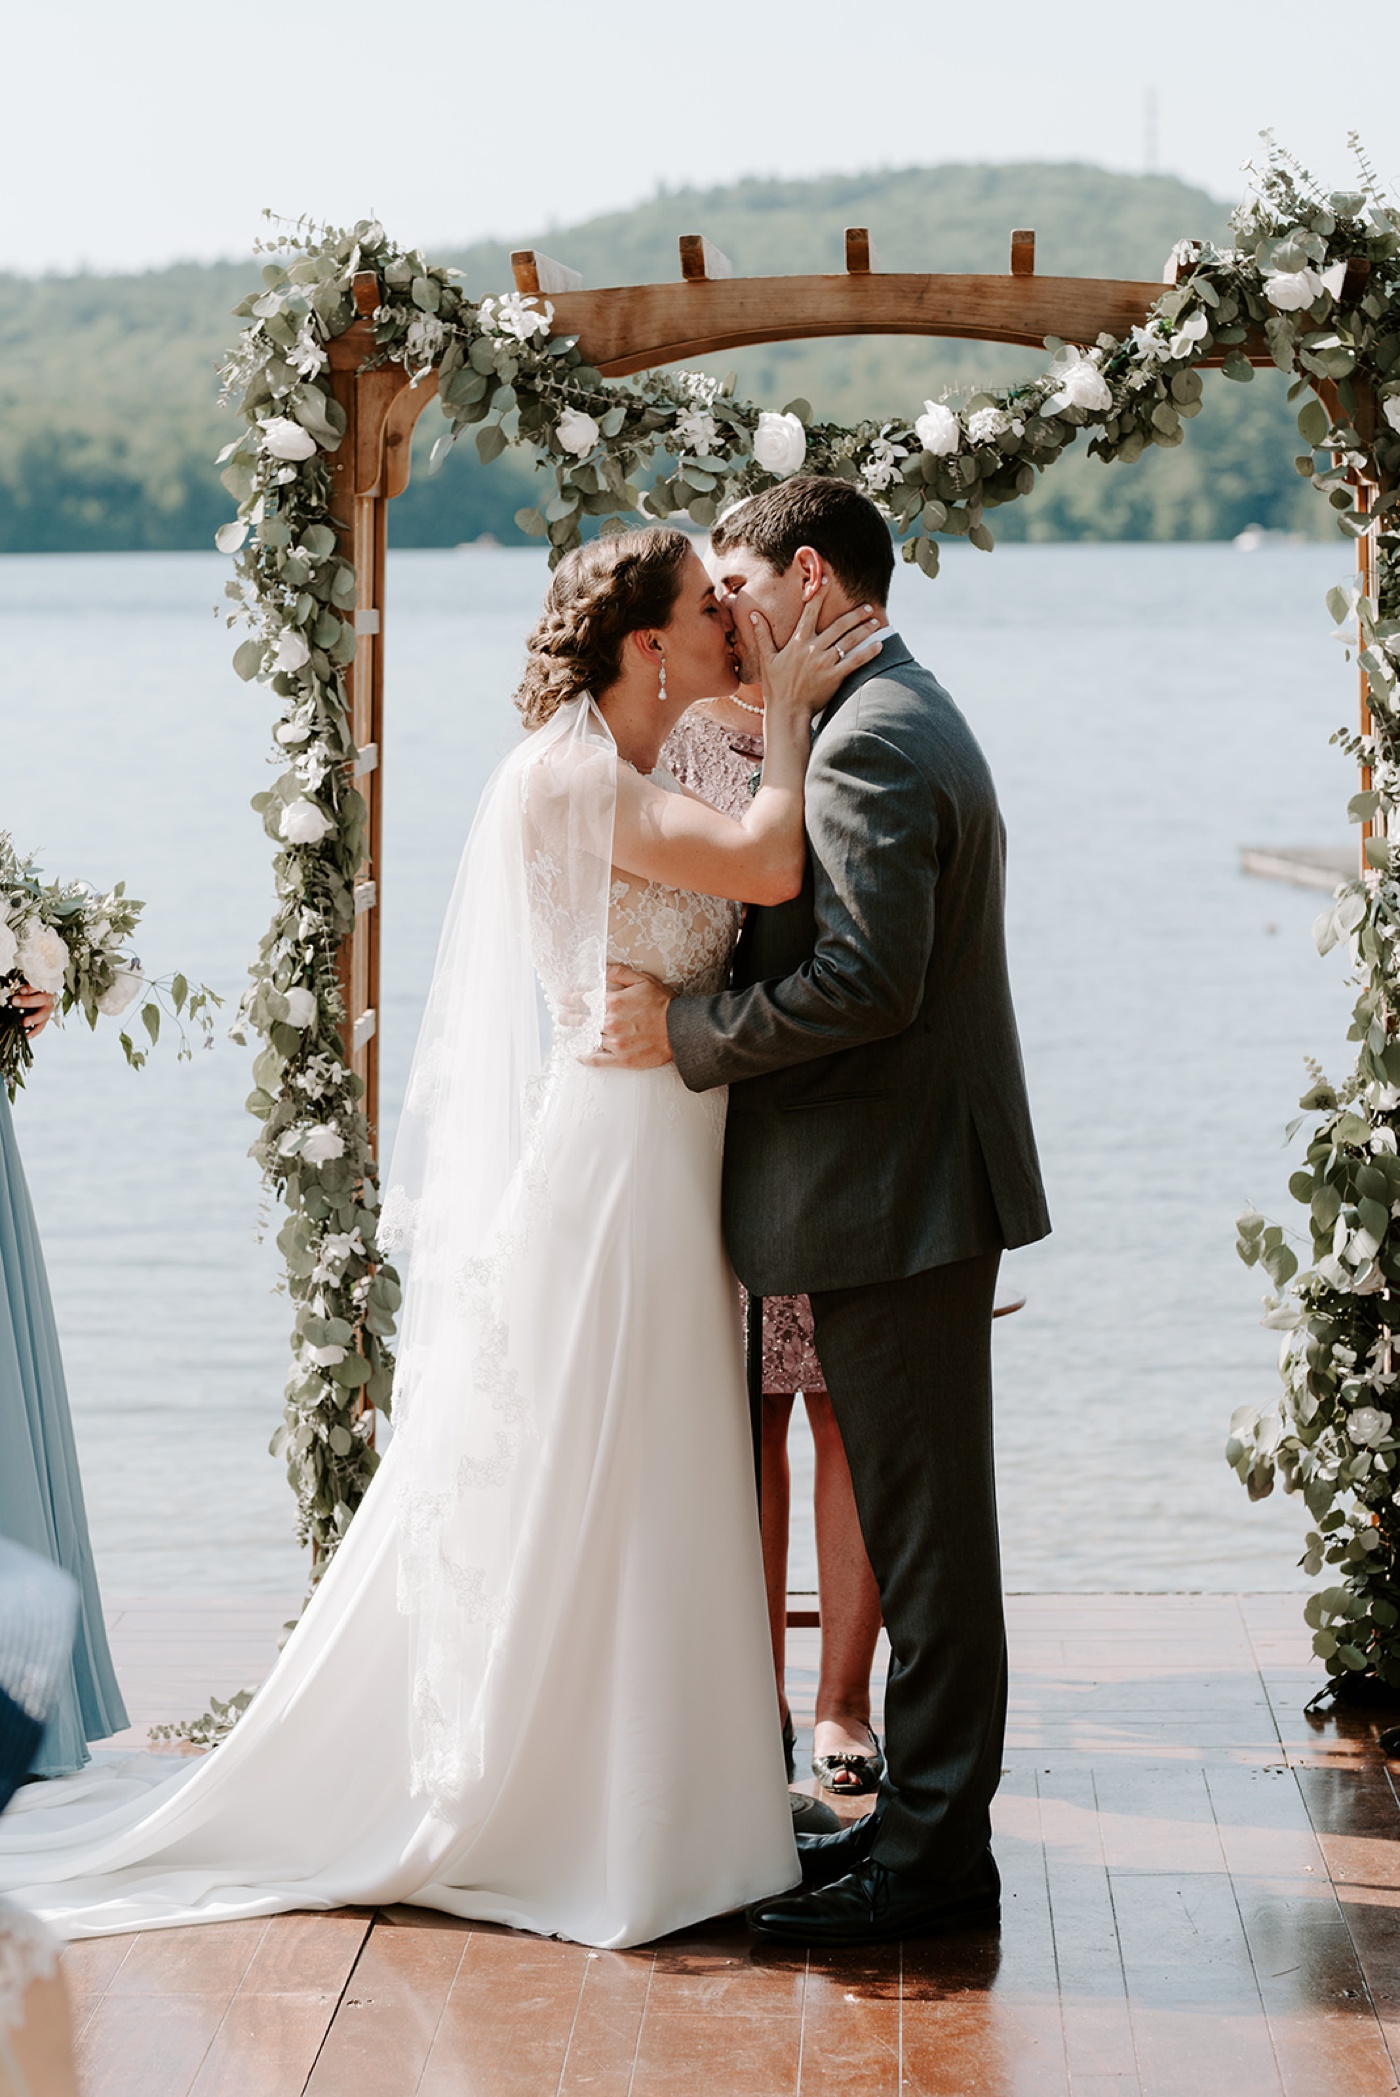 Wedding ceremony at a private lake property in New Hampshire